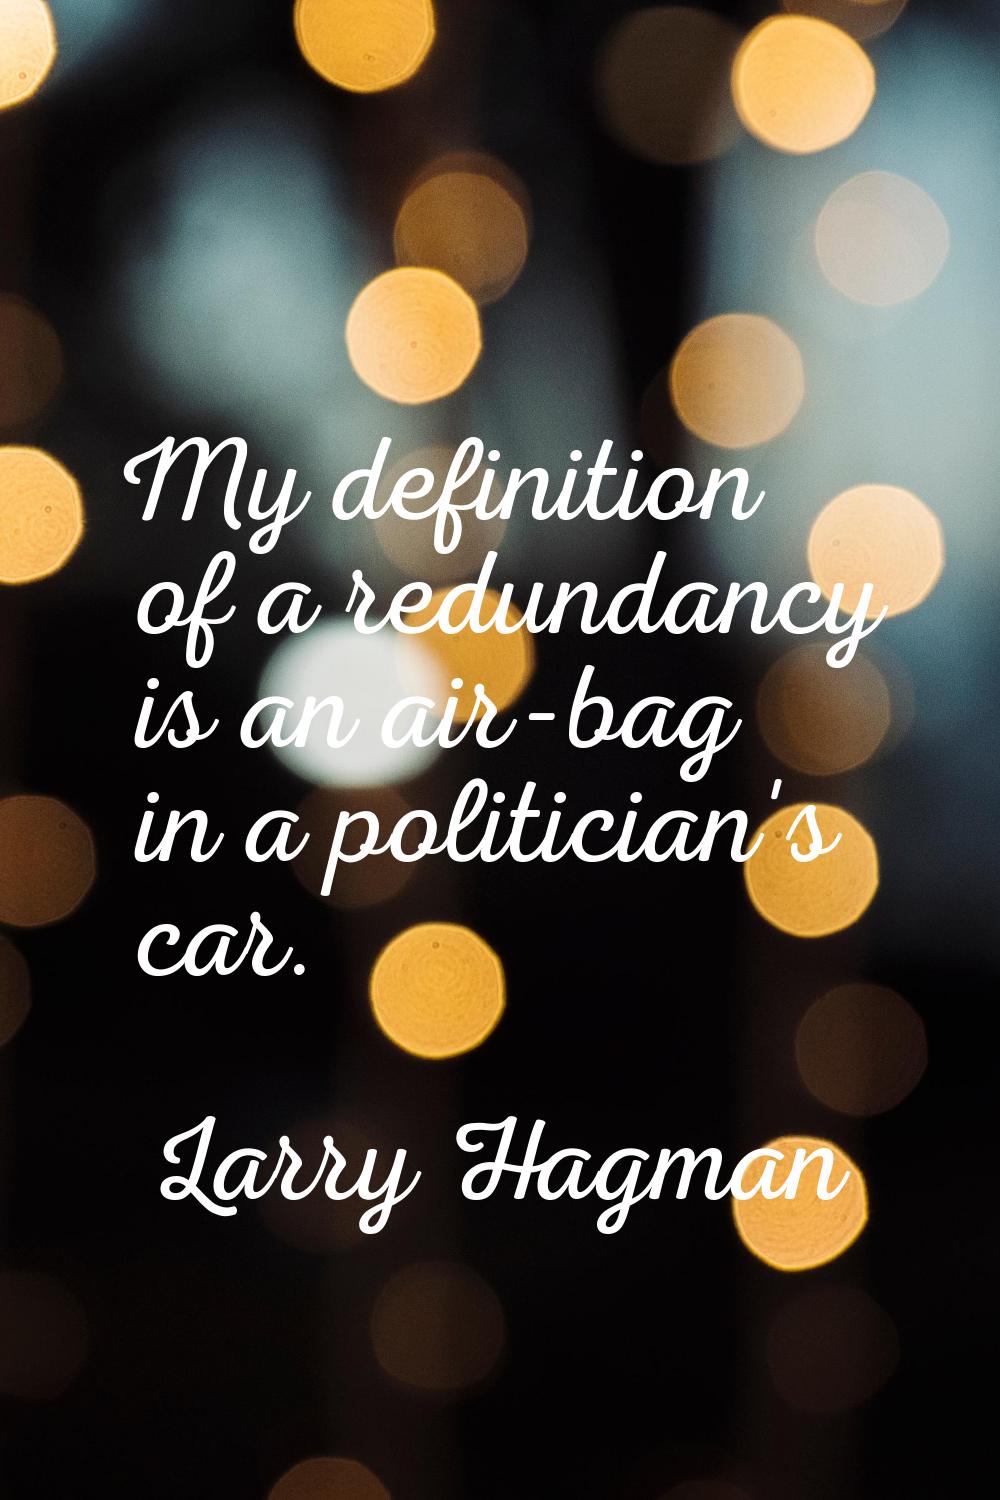 My definition of a redundancy is an air-bag in a politician's car.